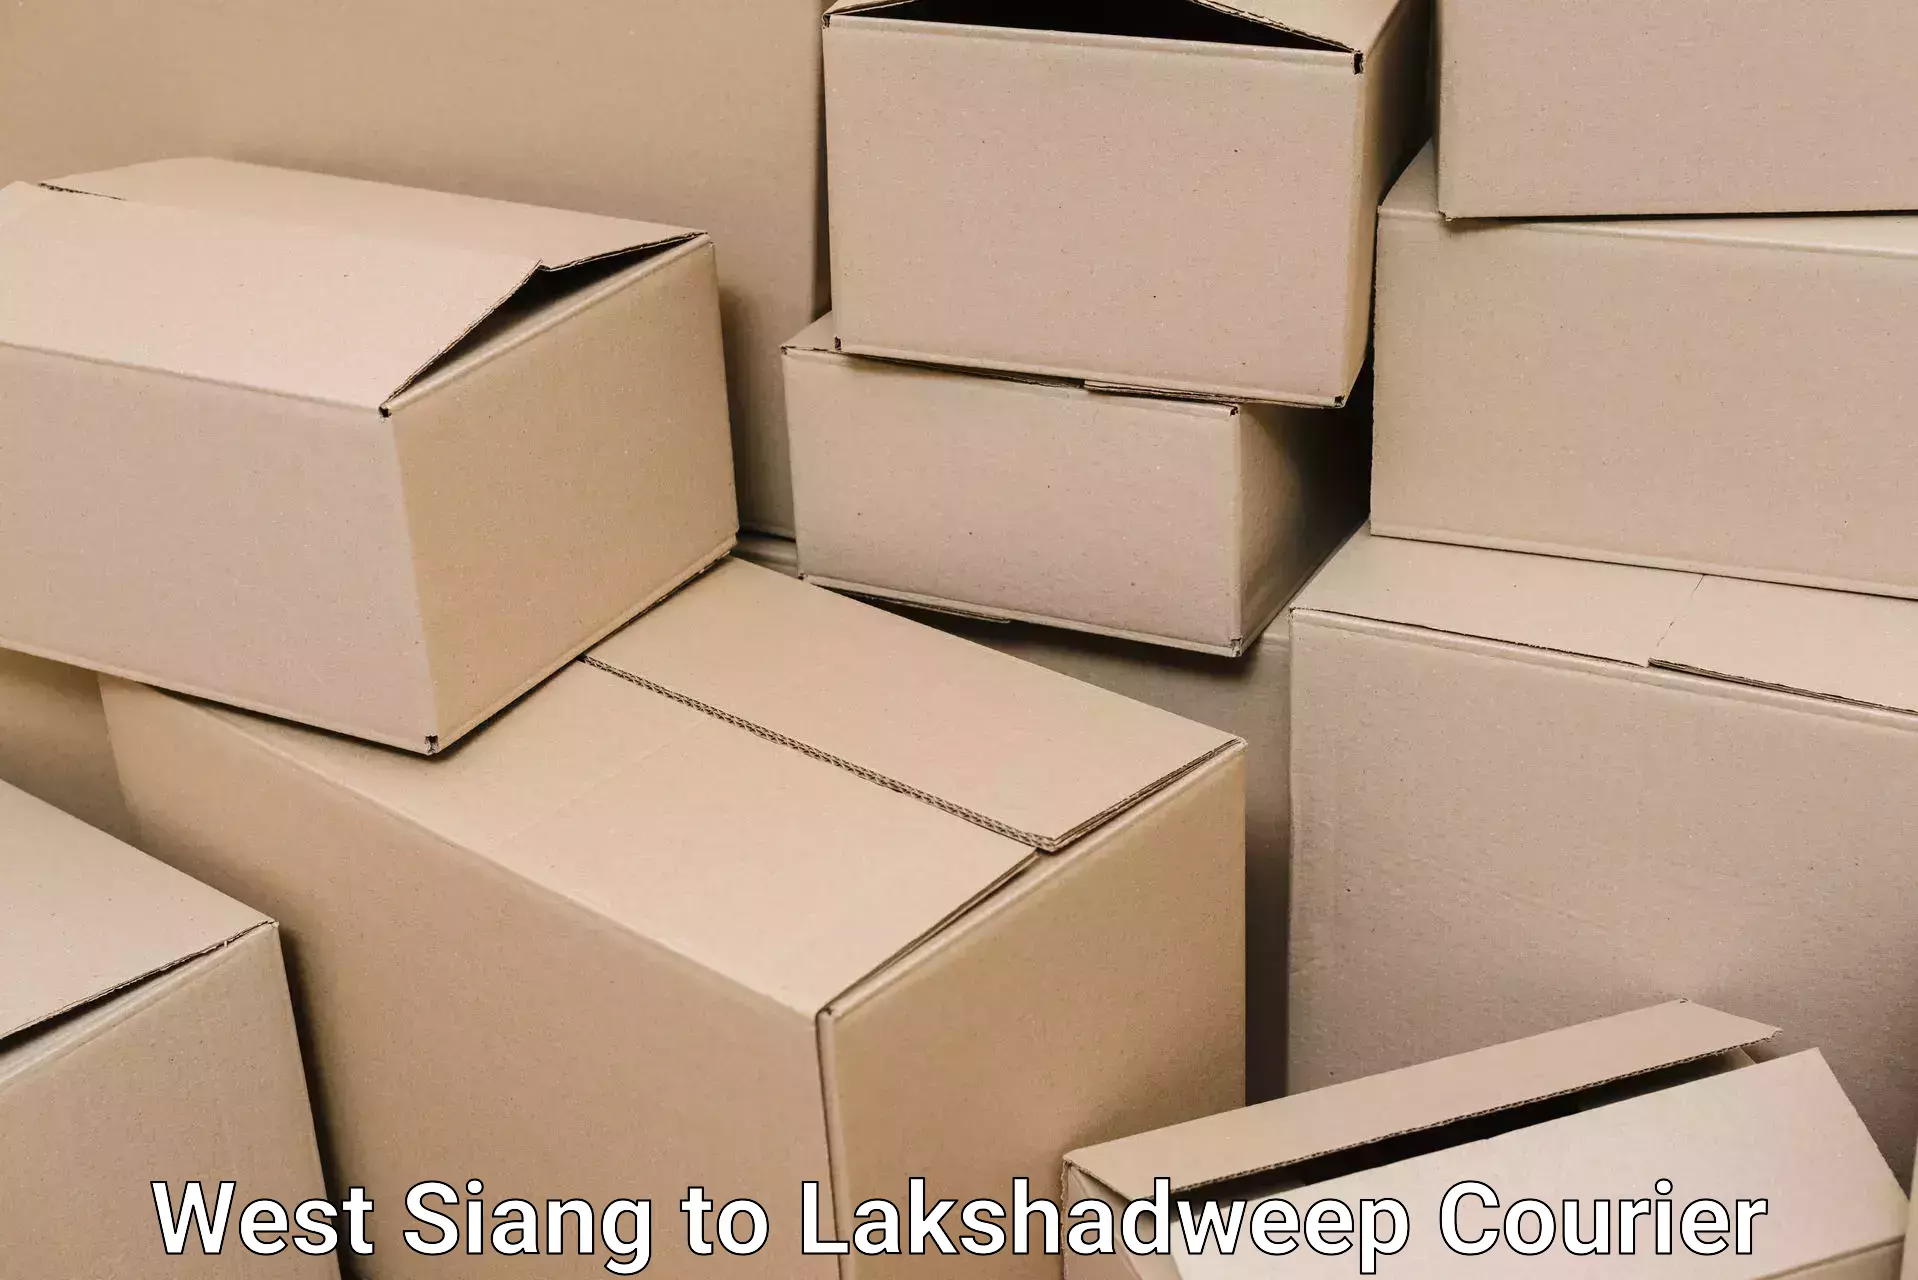 Professional goods transport West Siang to Lakshadweep